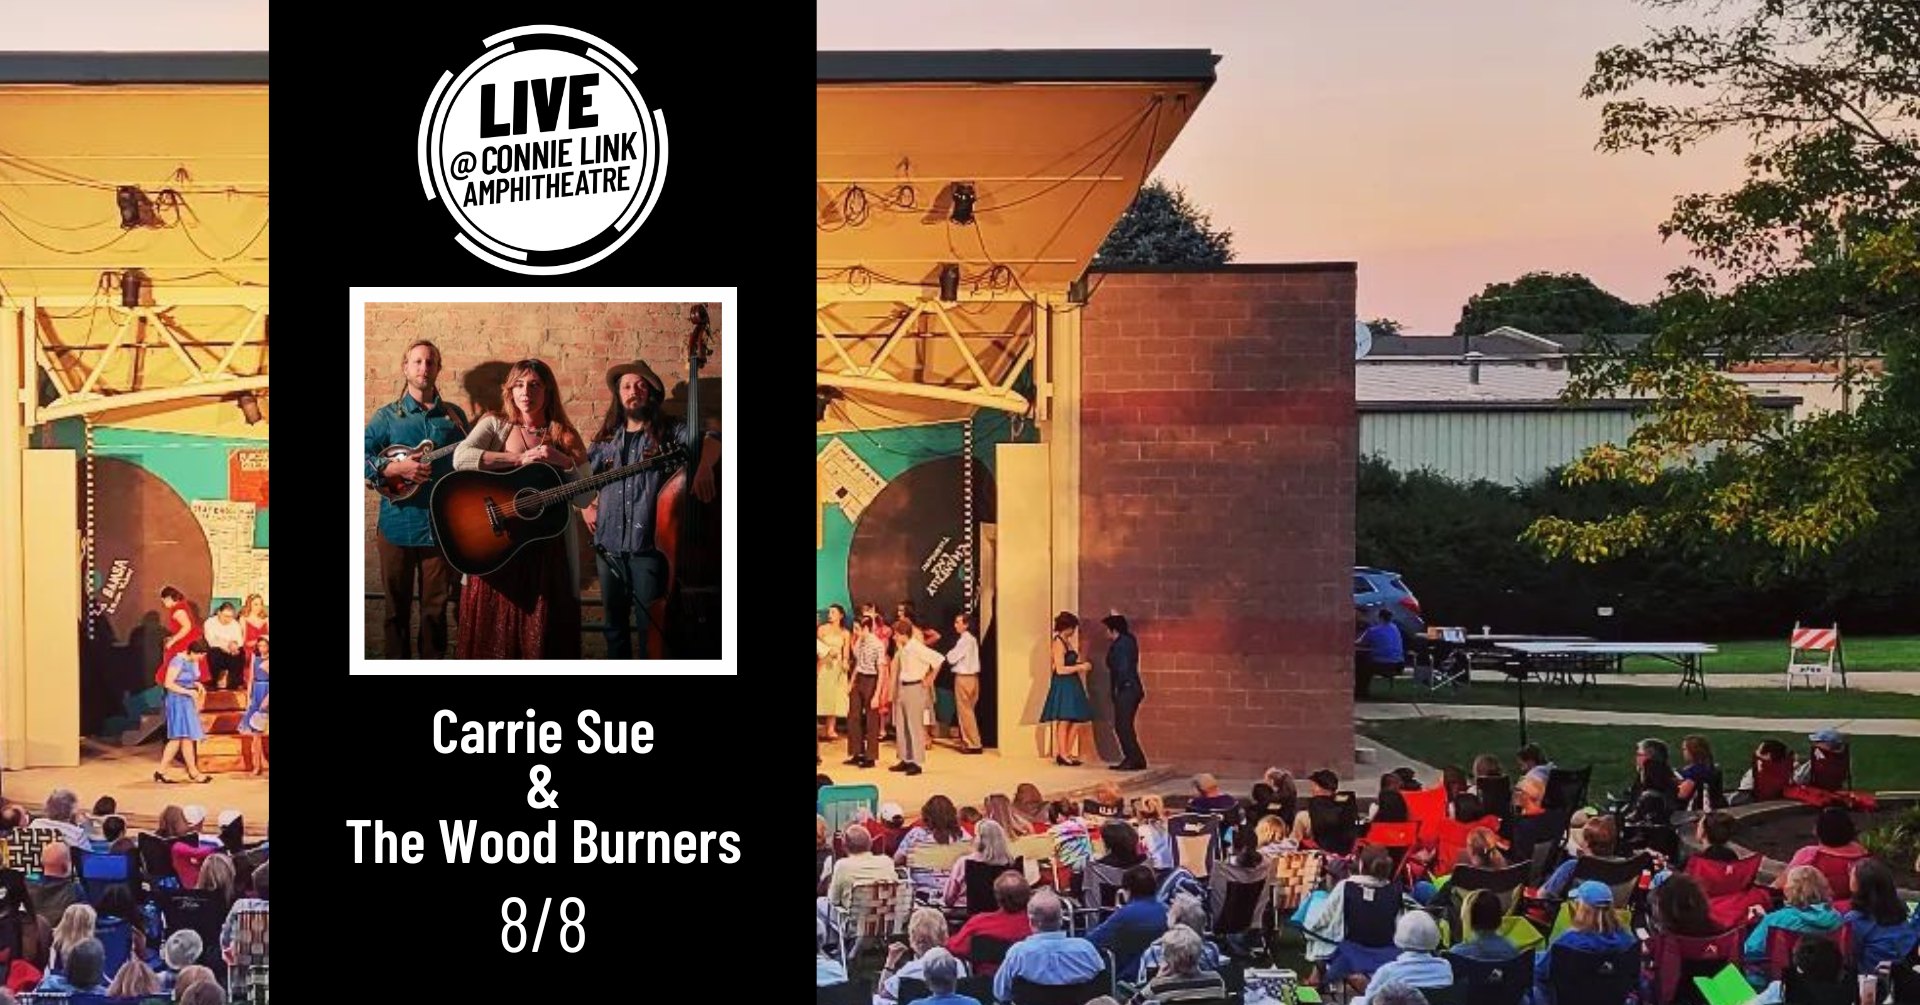 Normal LIVE presents Carrie Sue & The Wood Burners @ Connie Link Amphitheatre